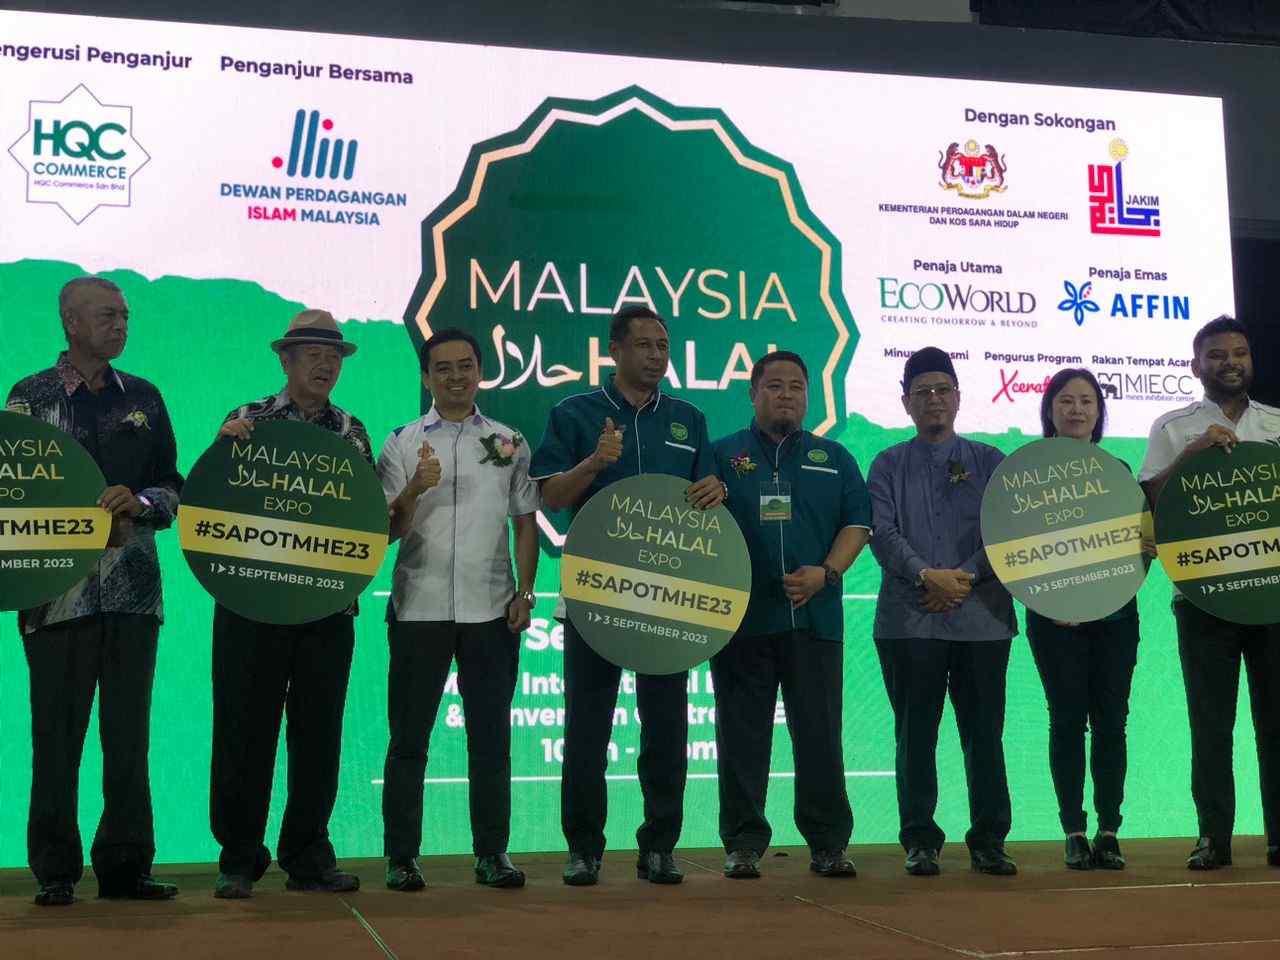 Malaysia Halal Expo 2023 – Empowering Local for Global Sustainability